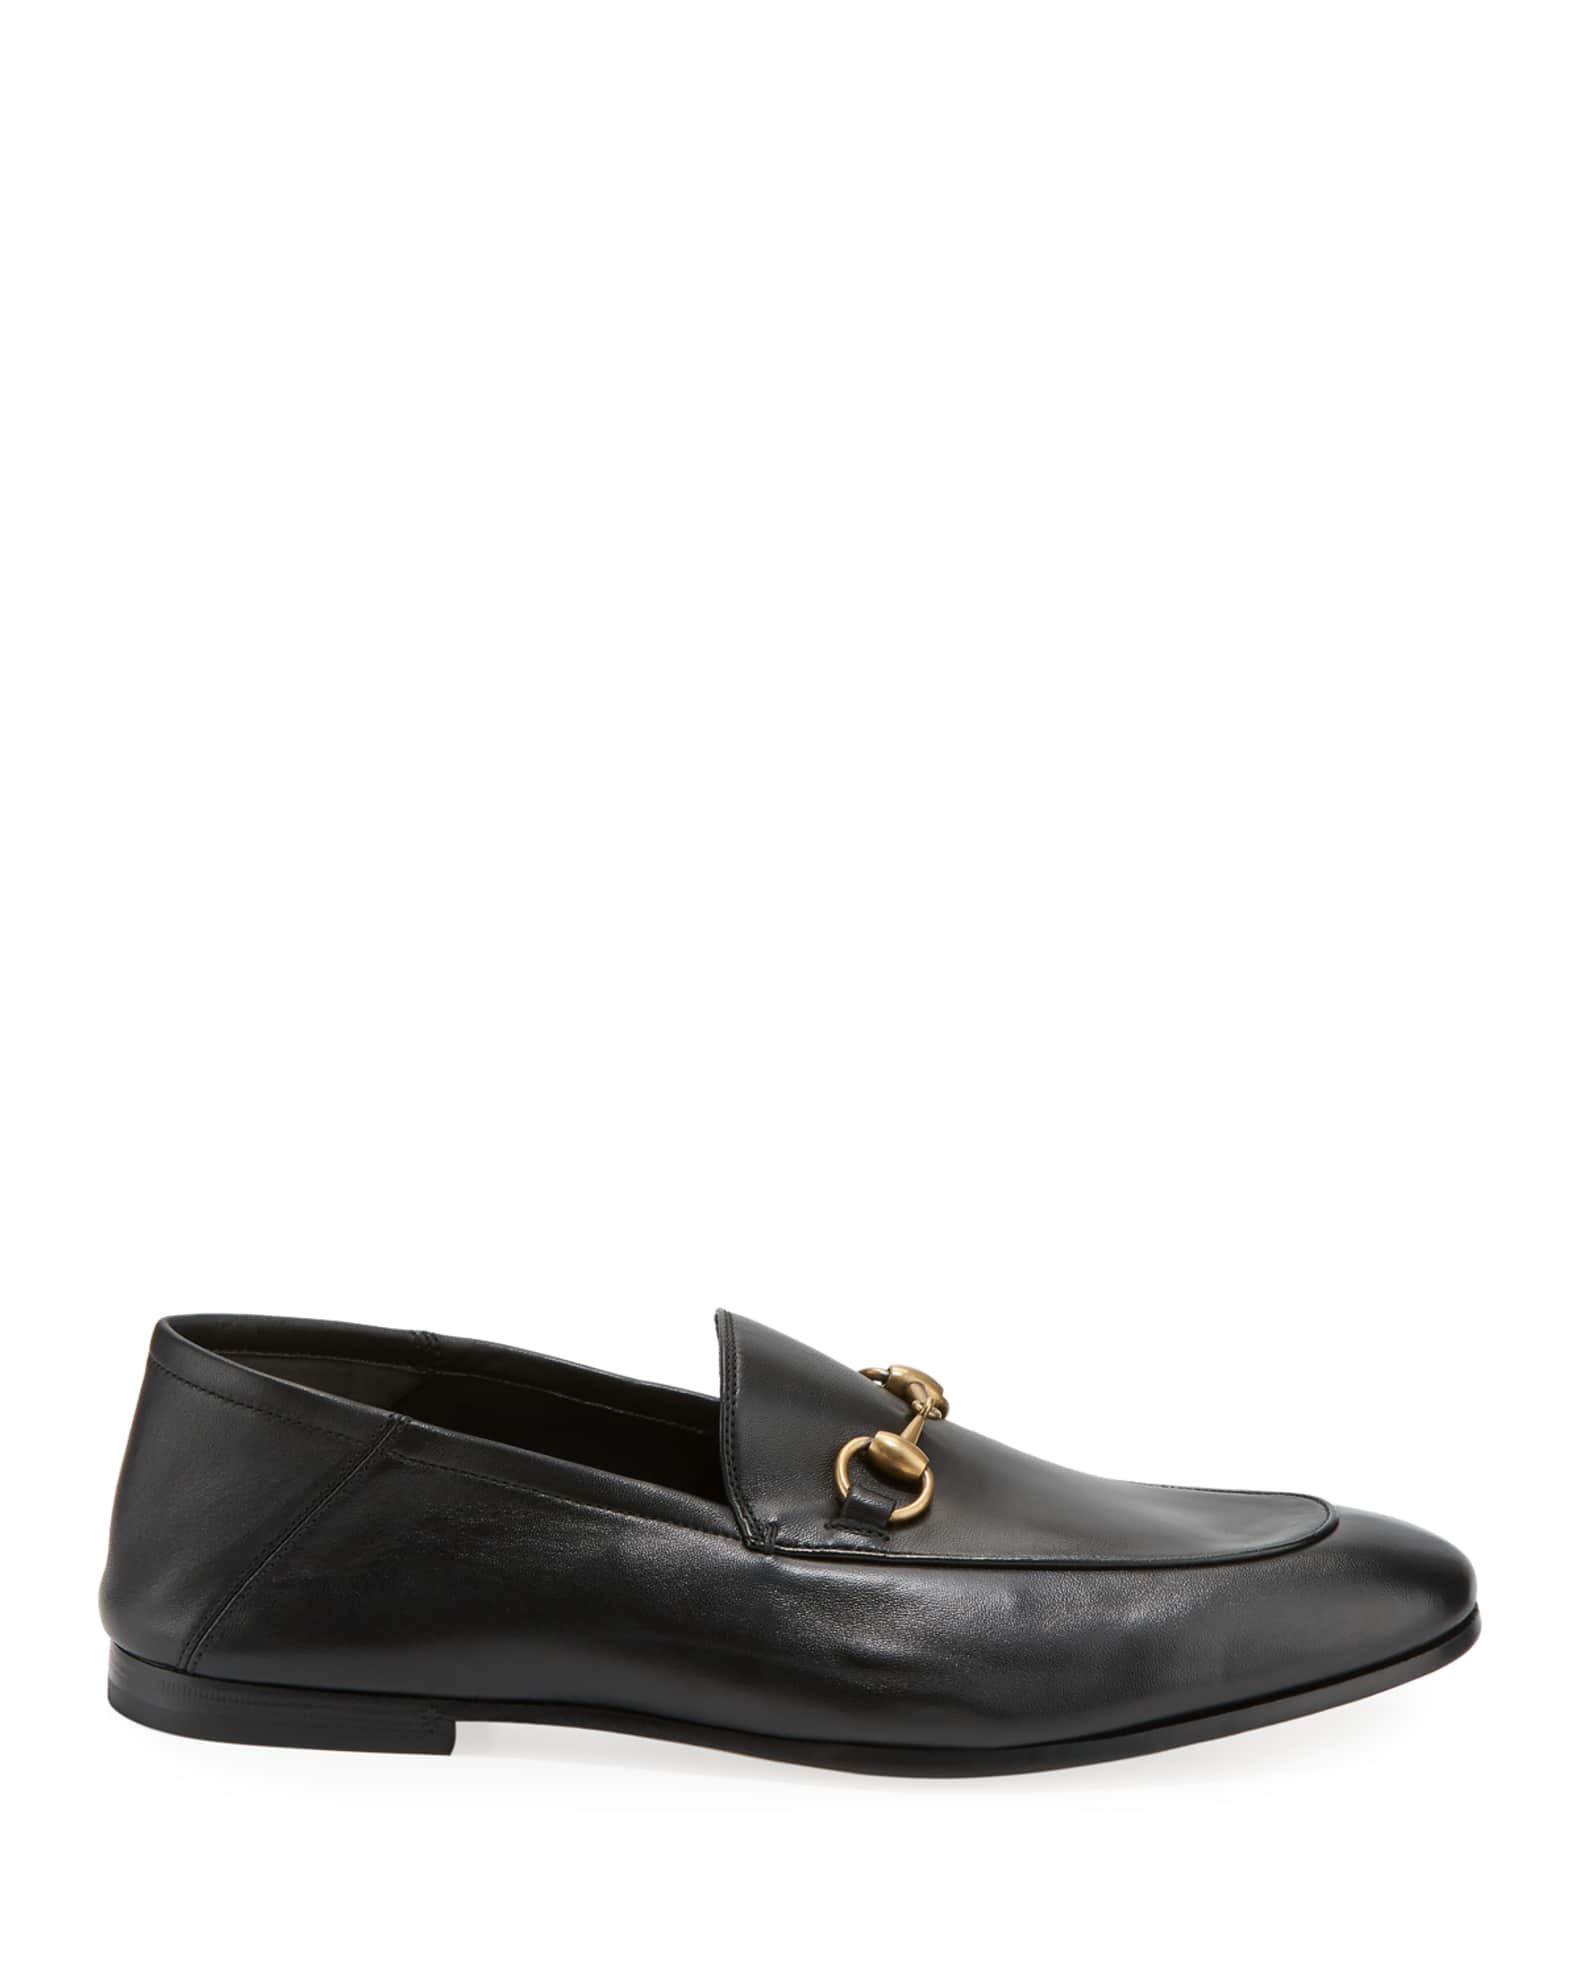 Gucci Soft Leather Bit-Strap Loafer | Neiman Marcus